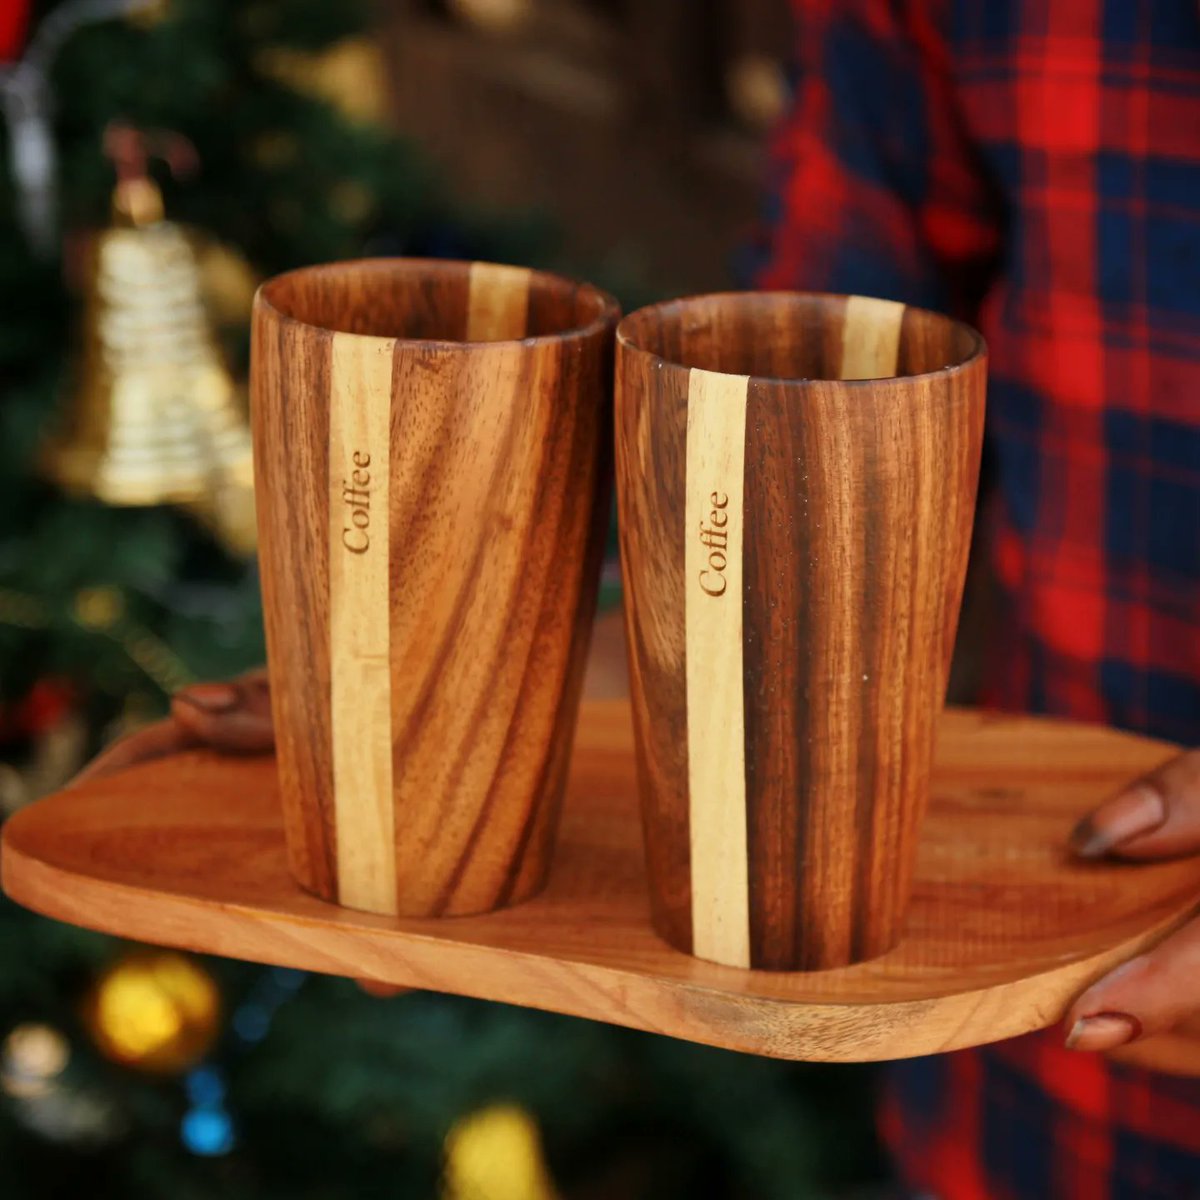 Enjoy your favourite beverage in style in our tall wooden glasses that can be personalised with your text.
#woodgeek #woodgeekstore #tallglasses #highballglasses #glassware #coffeecup #coffeeholic #kitchenaccessories #woodenkitchenware #housewarminggift #personalisedgifts